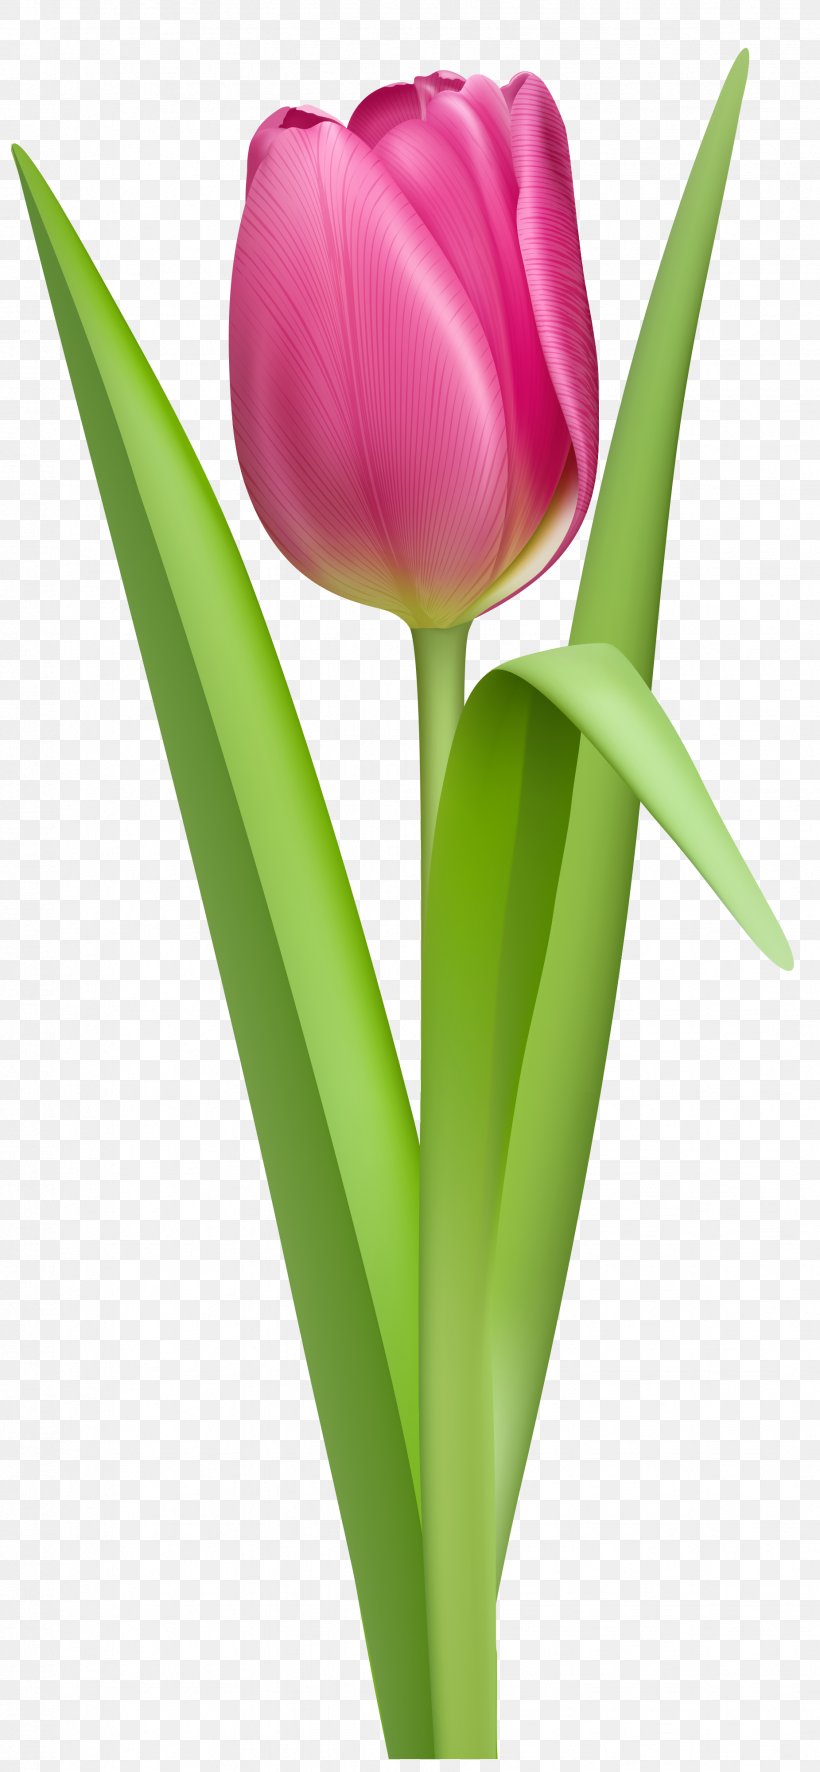 Tulip Clip Art, PNG, 1851x4000px, Tulip, Flower, Flowering Plant, Image File Formats, Image Resolution Download Free